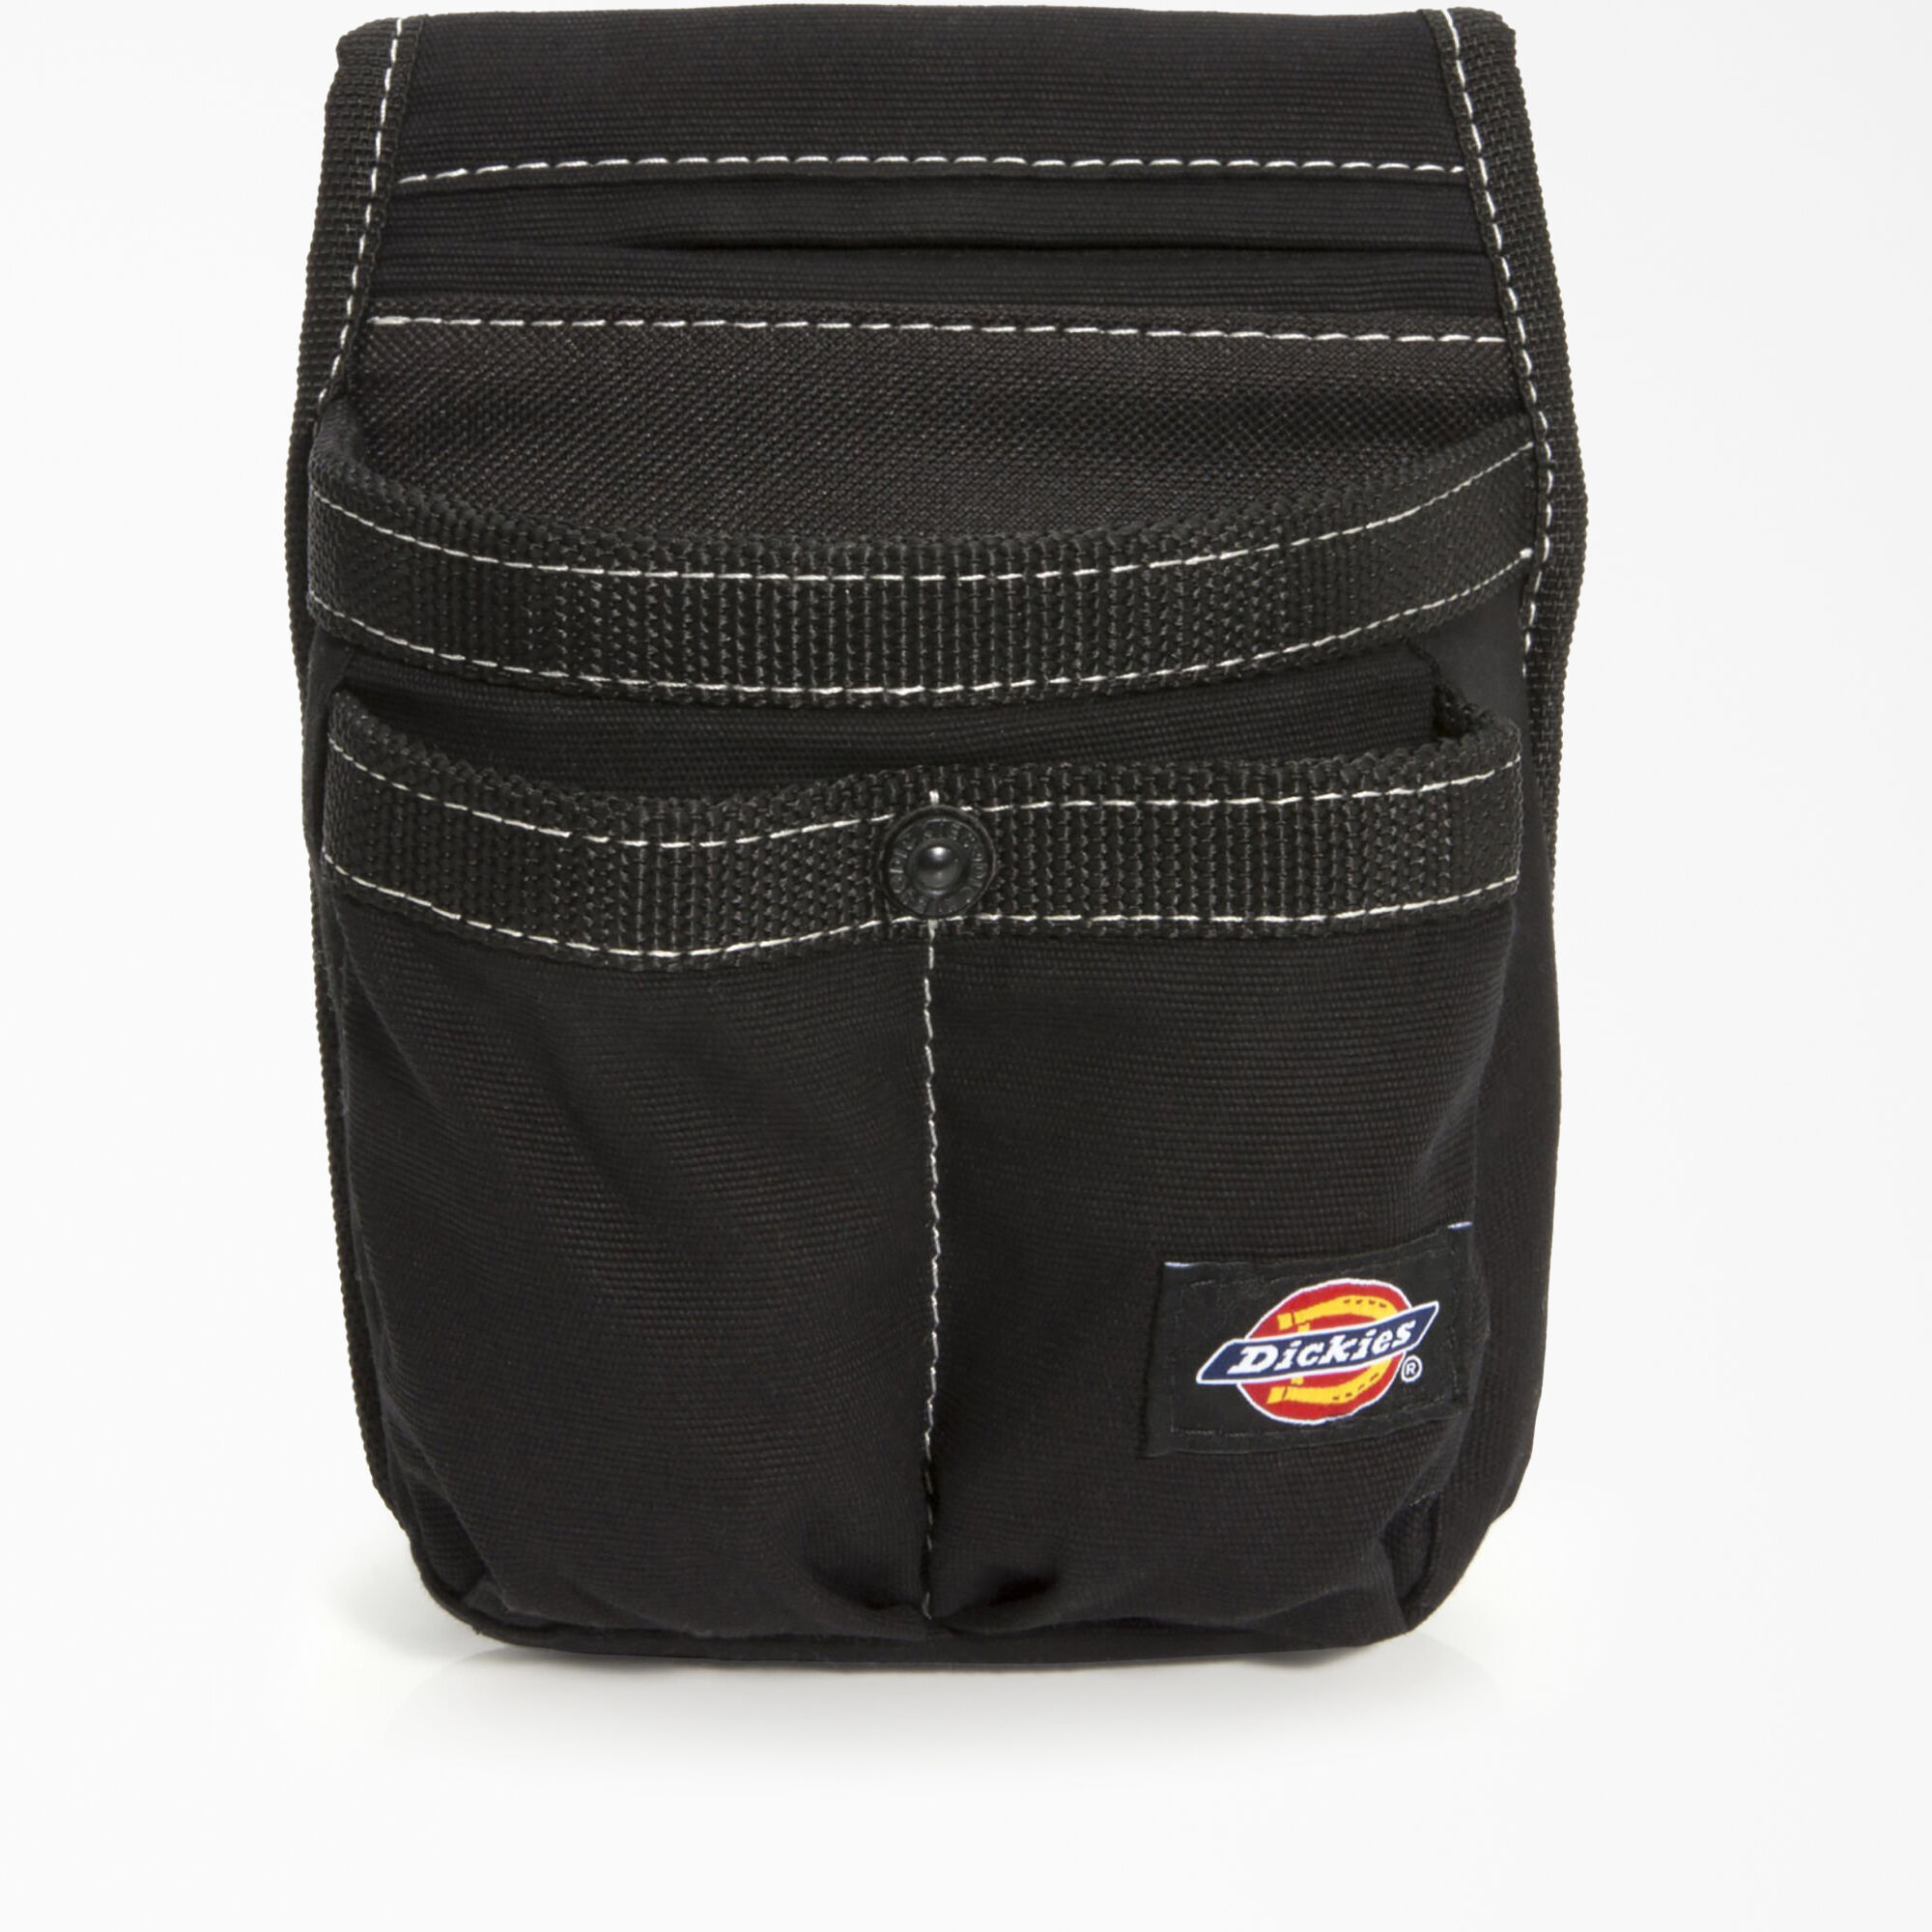 Dickies 57059 Black 4-Pocket Tool and Cell Phone Pouch